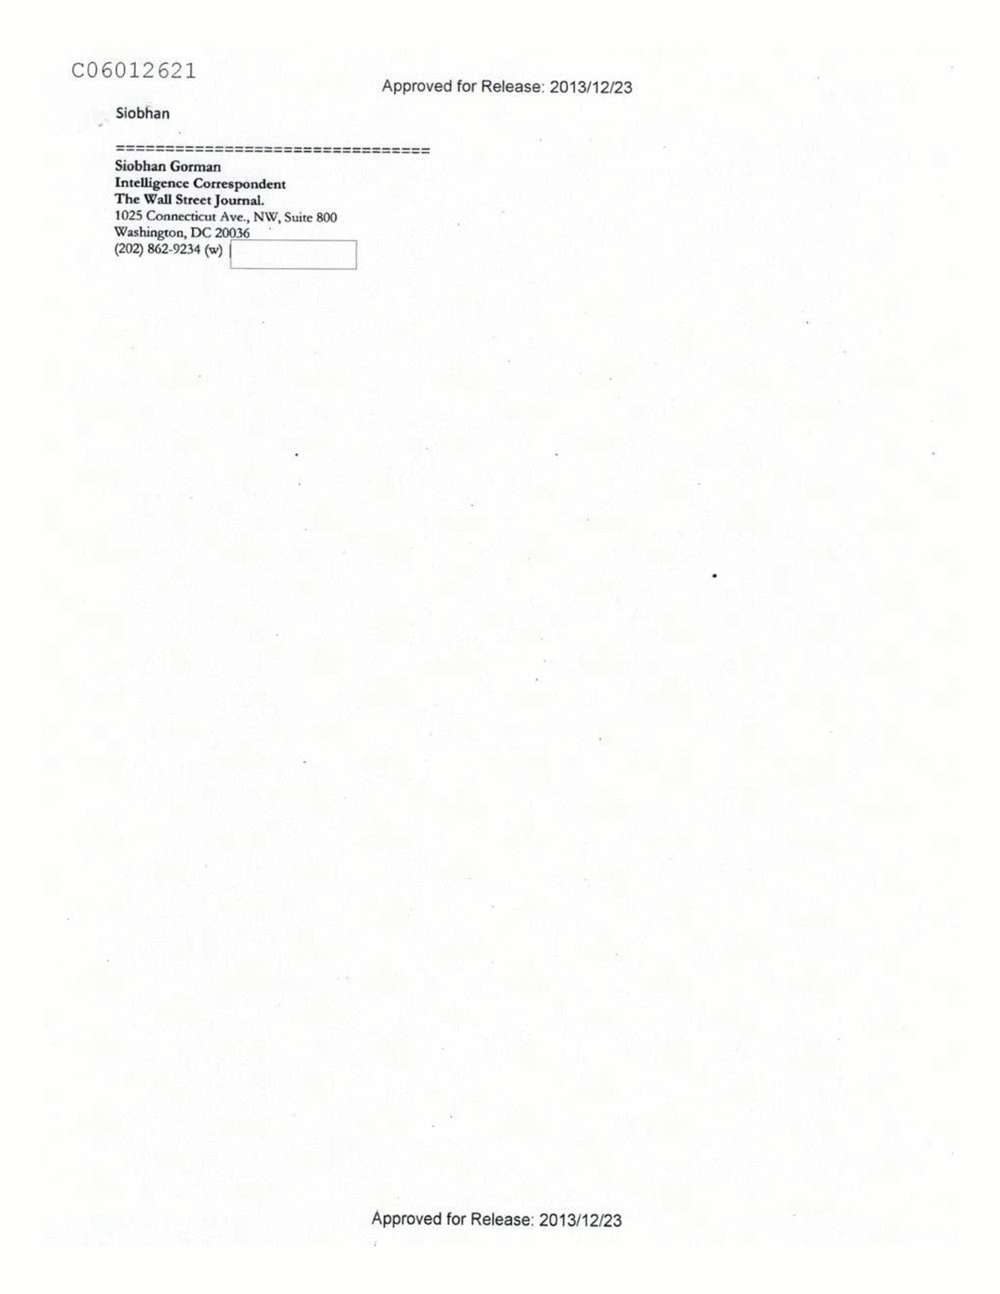 Page 172 from Email Correspondence Between Reporters and CIA Flacks